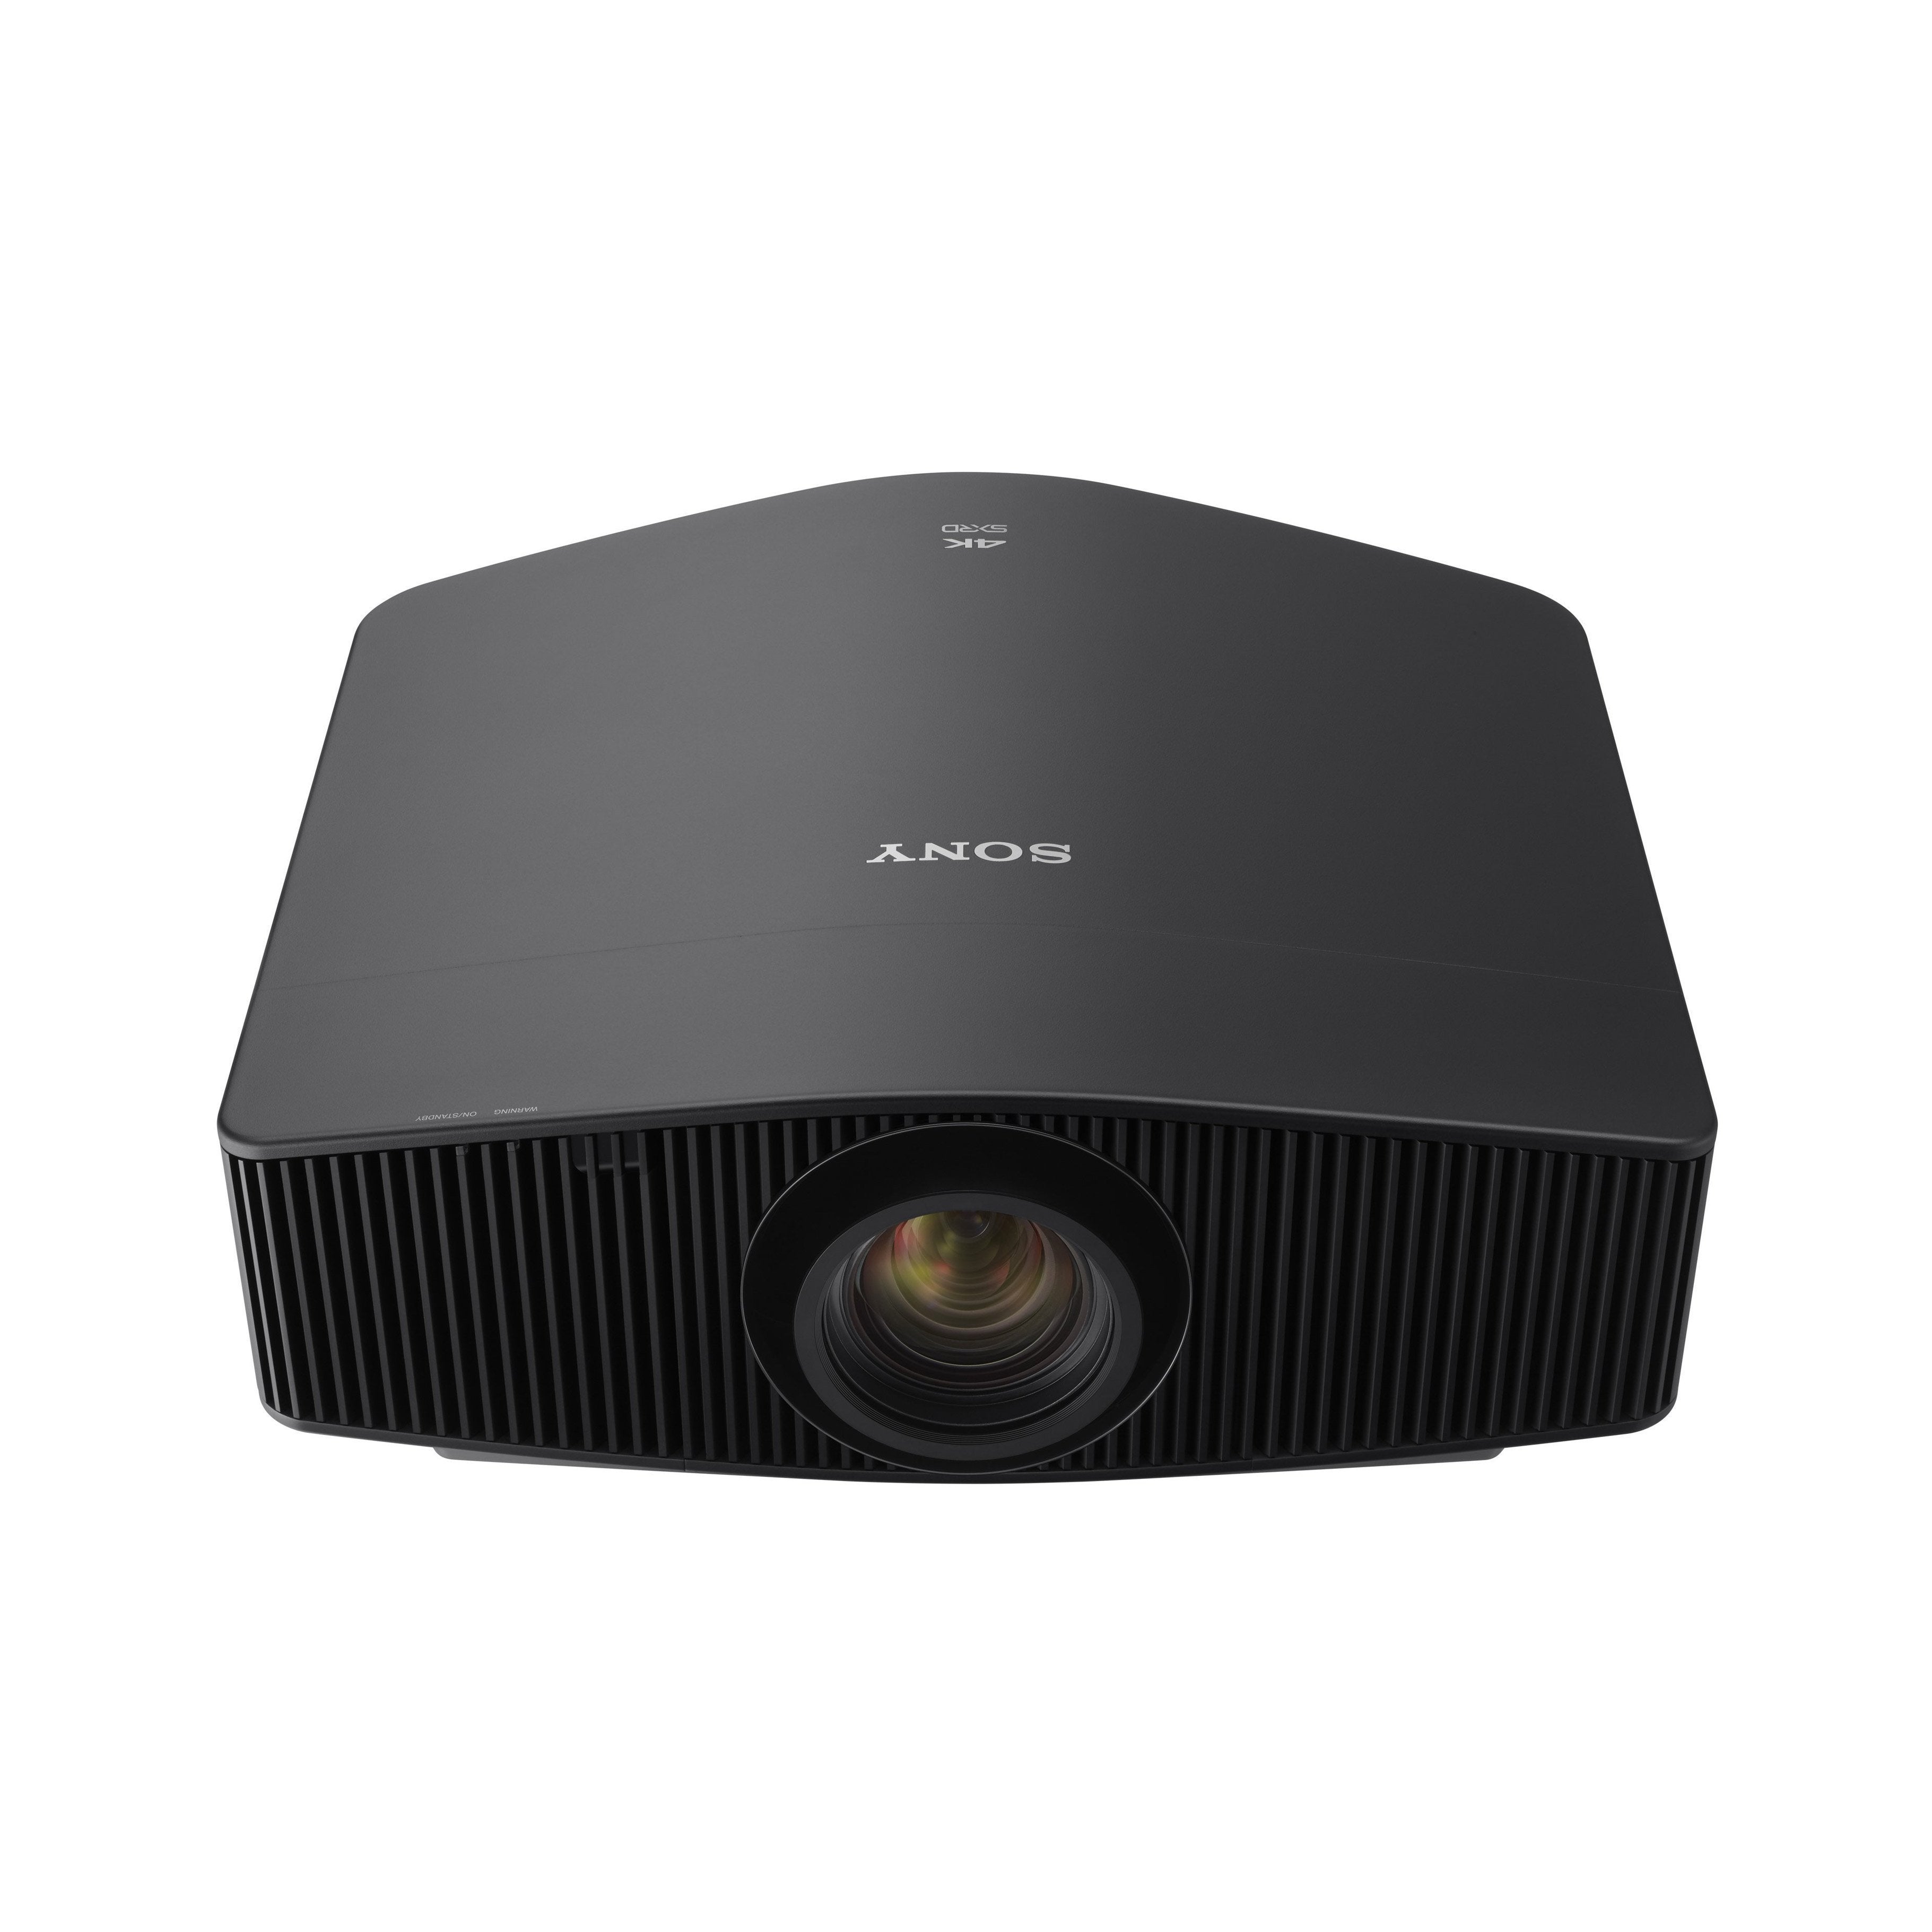 Sony VPL-VW995ES 4K HDR Laser Home Theater Projector